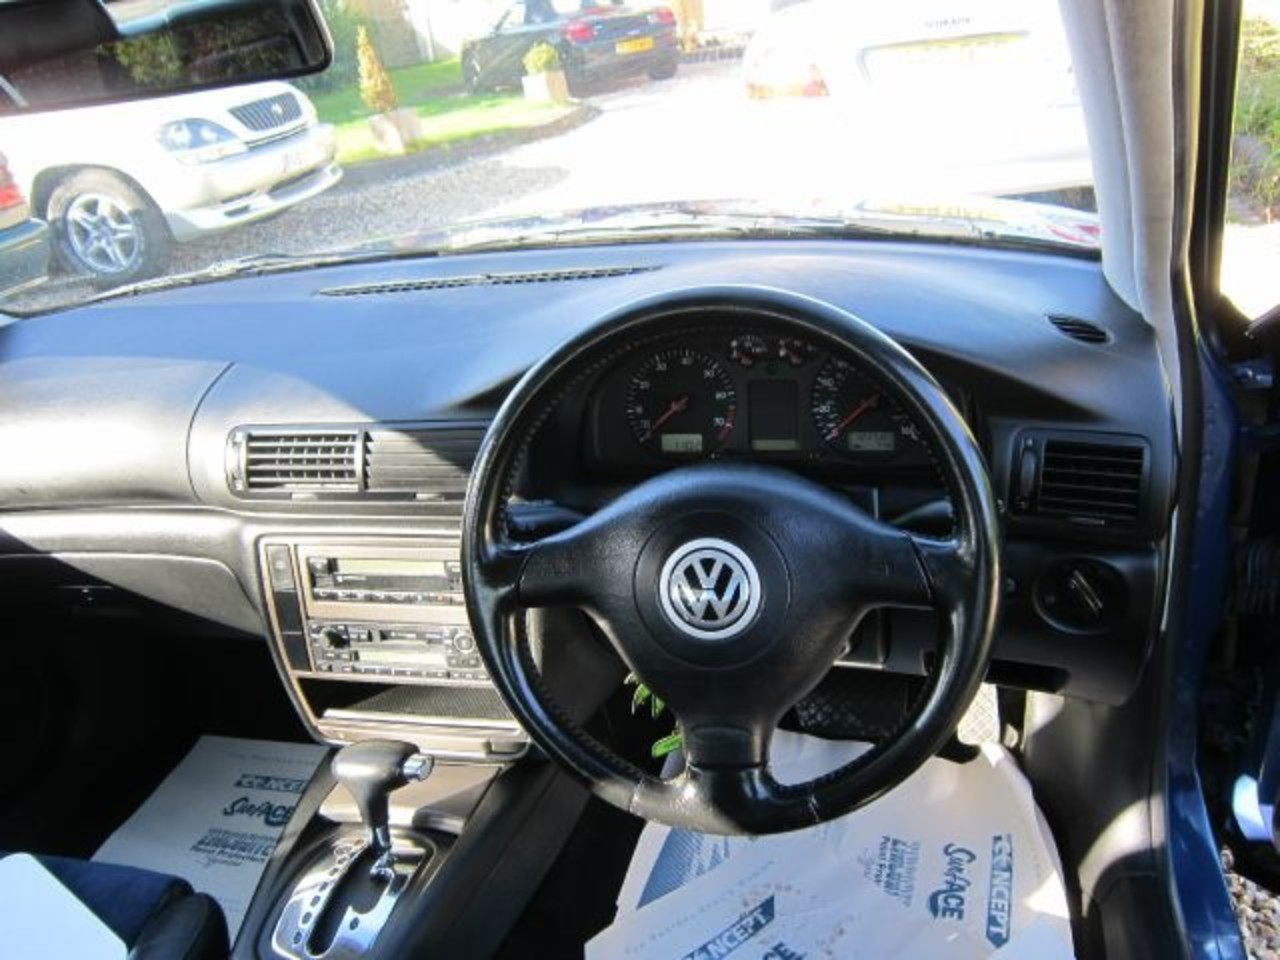 Volkswagen Passat V6 Syncro.FSH with 14 service stamps. for sale ...